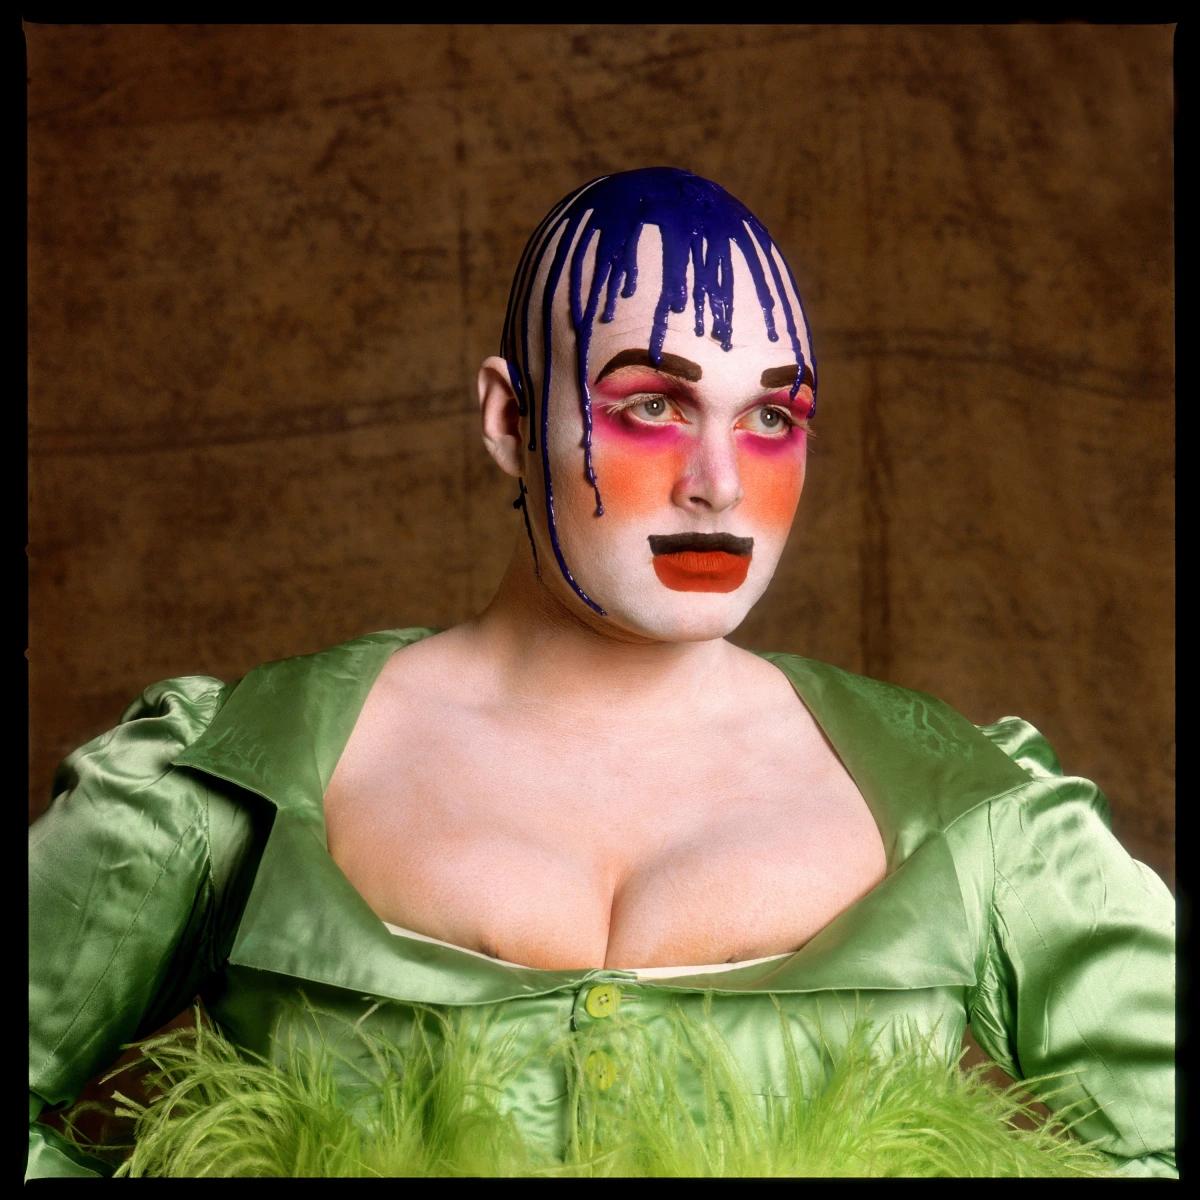 Leigh Bowery: Session 1, Look 2 - Photograph by Fergus Greer